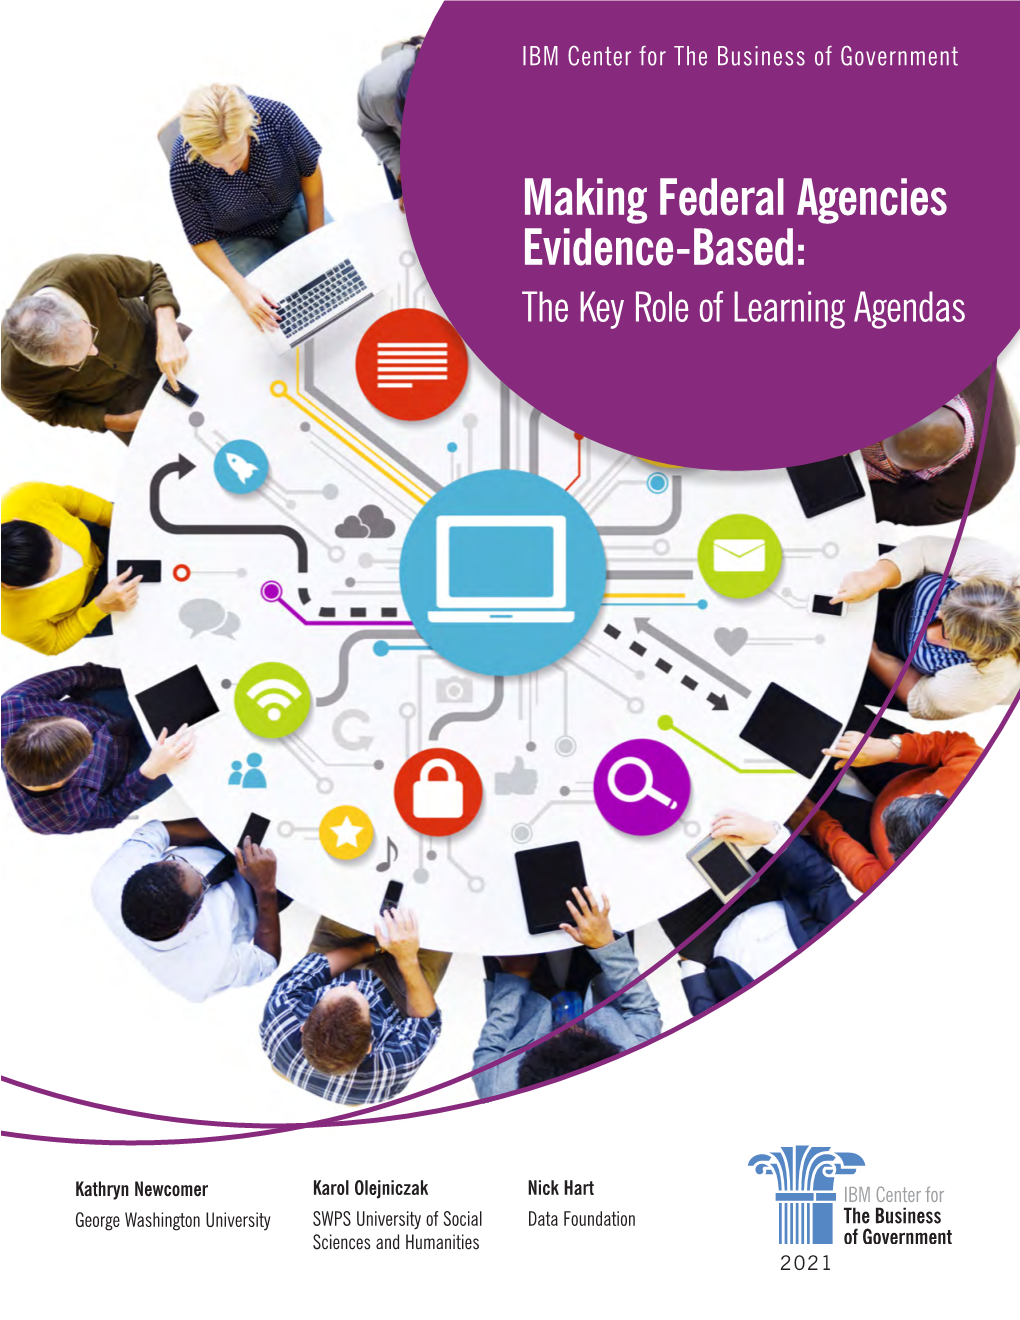 Making Federal Agencies Evidence-Based: the Key Role of Learning Agendas